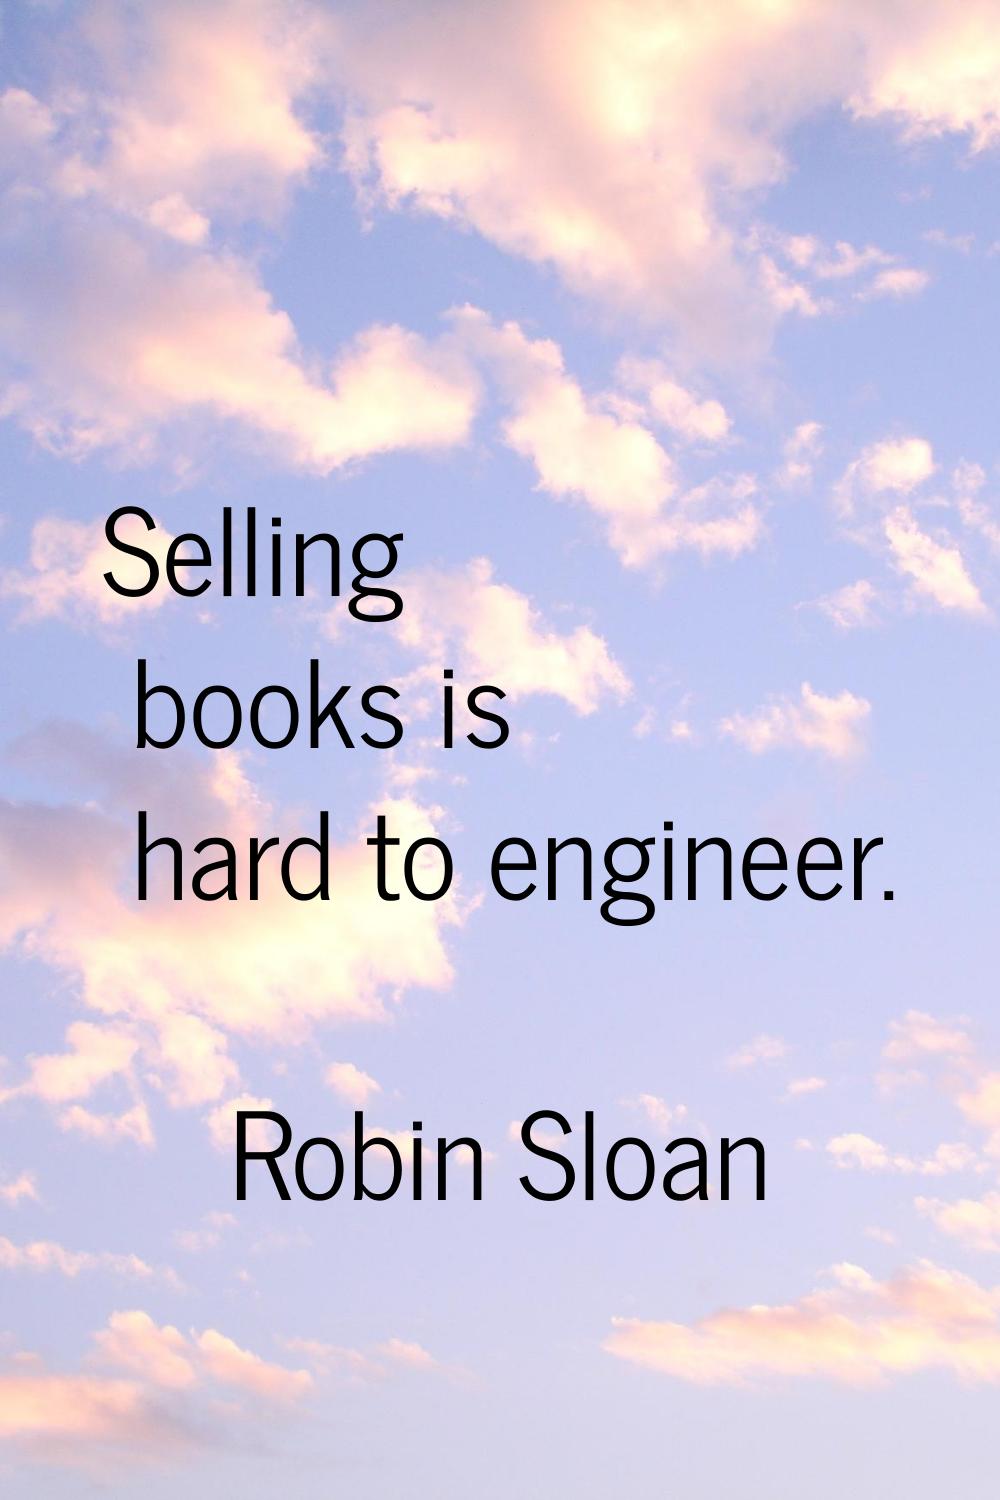 Selling books is hard to engineer.